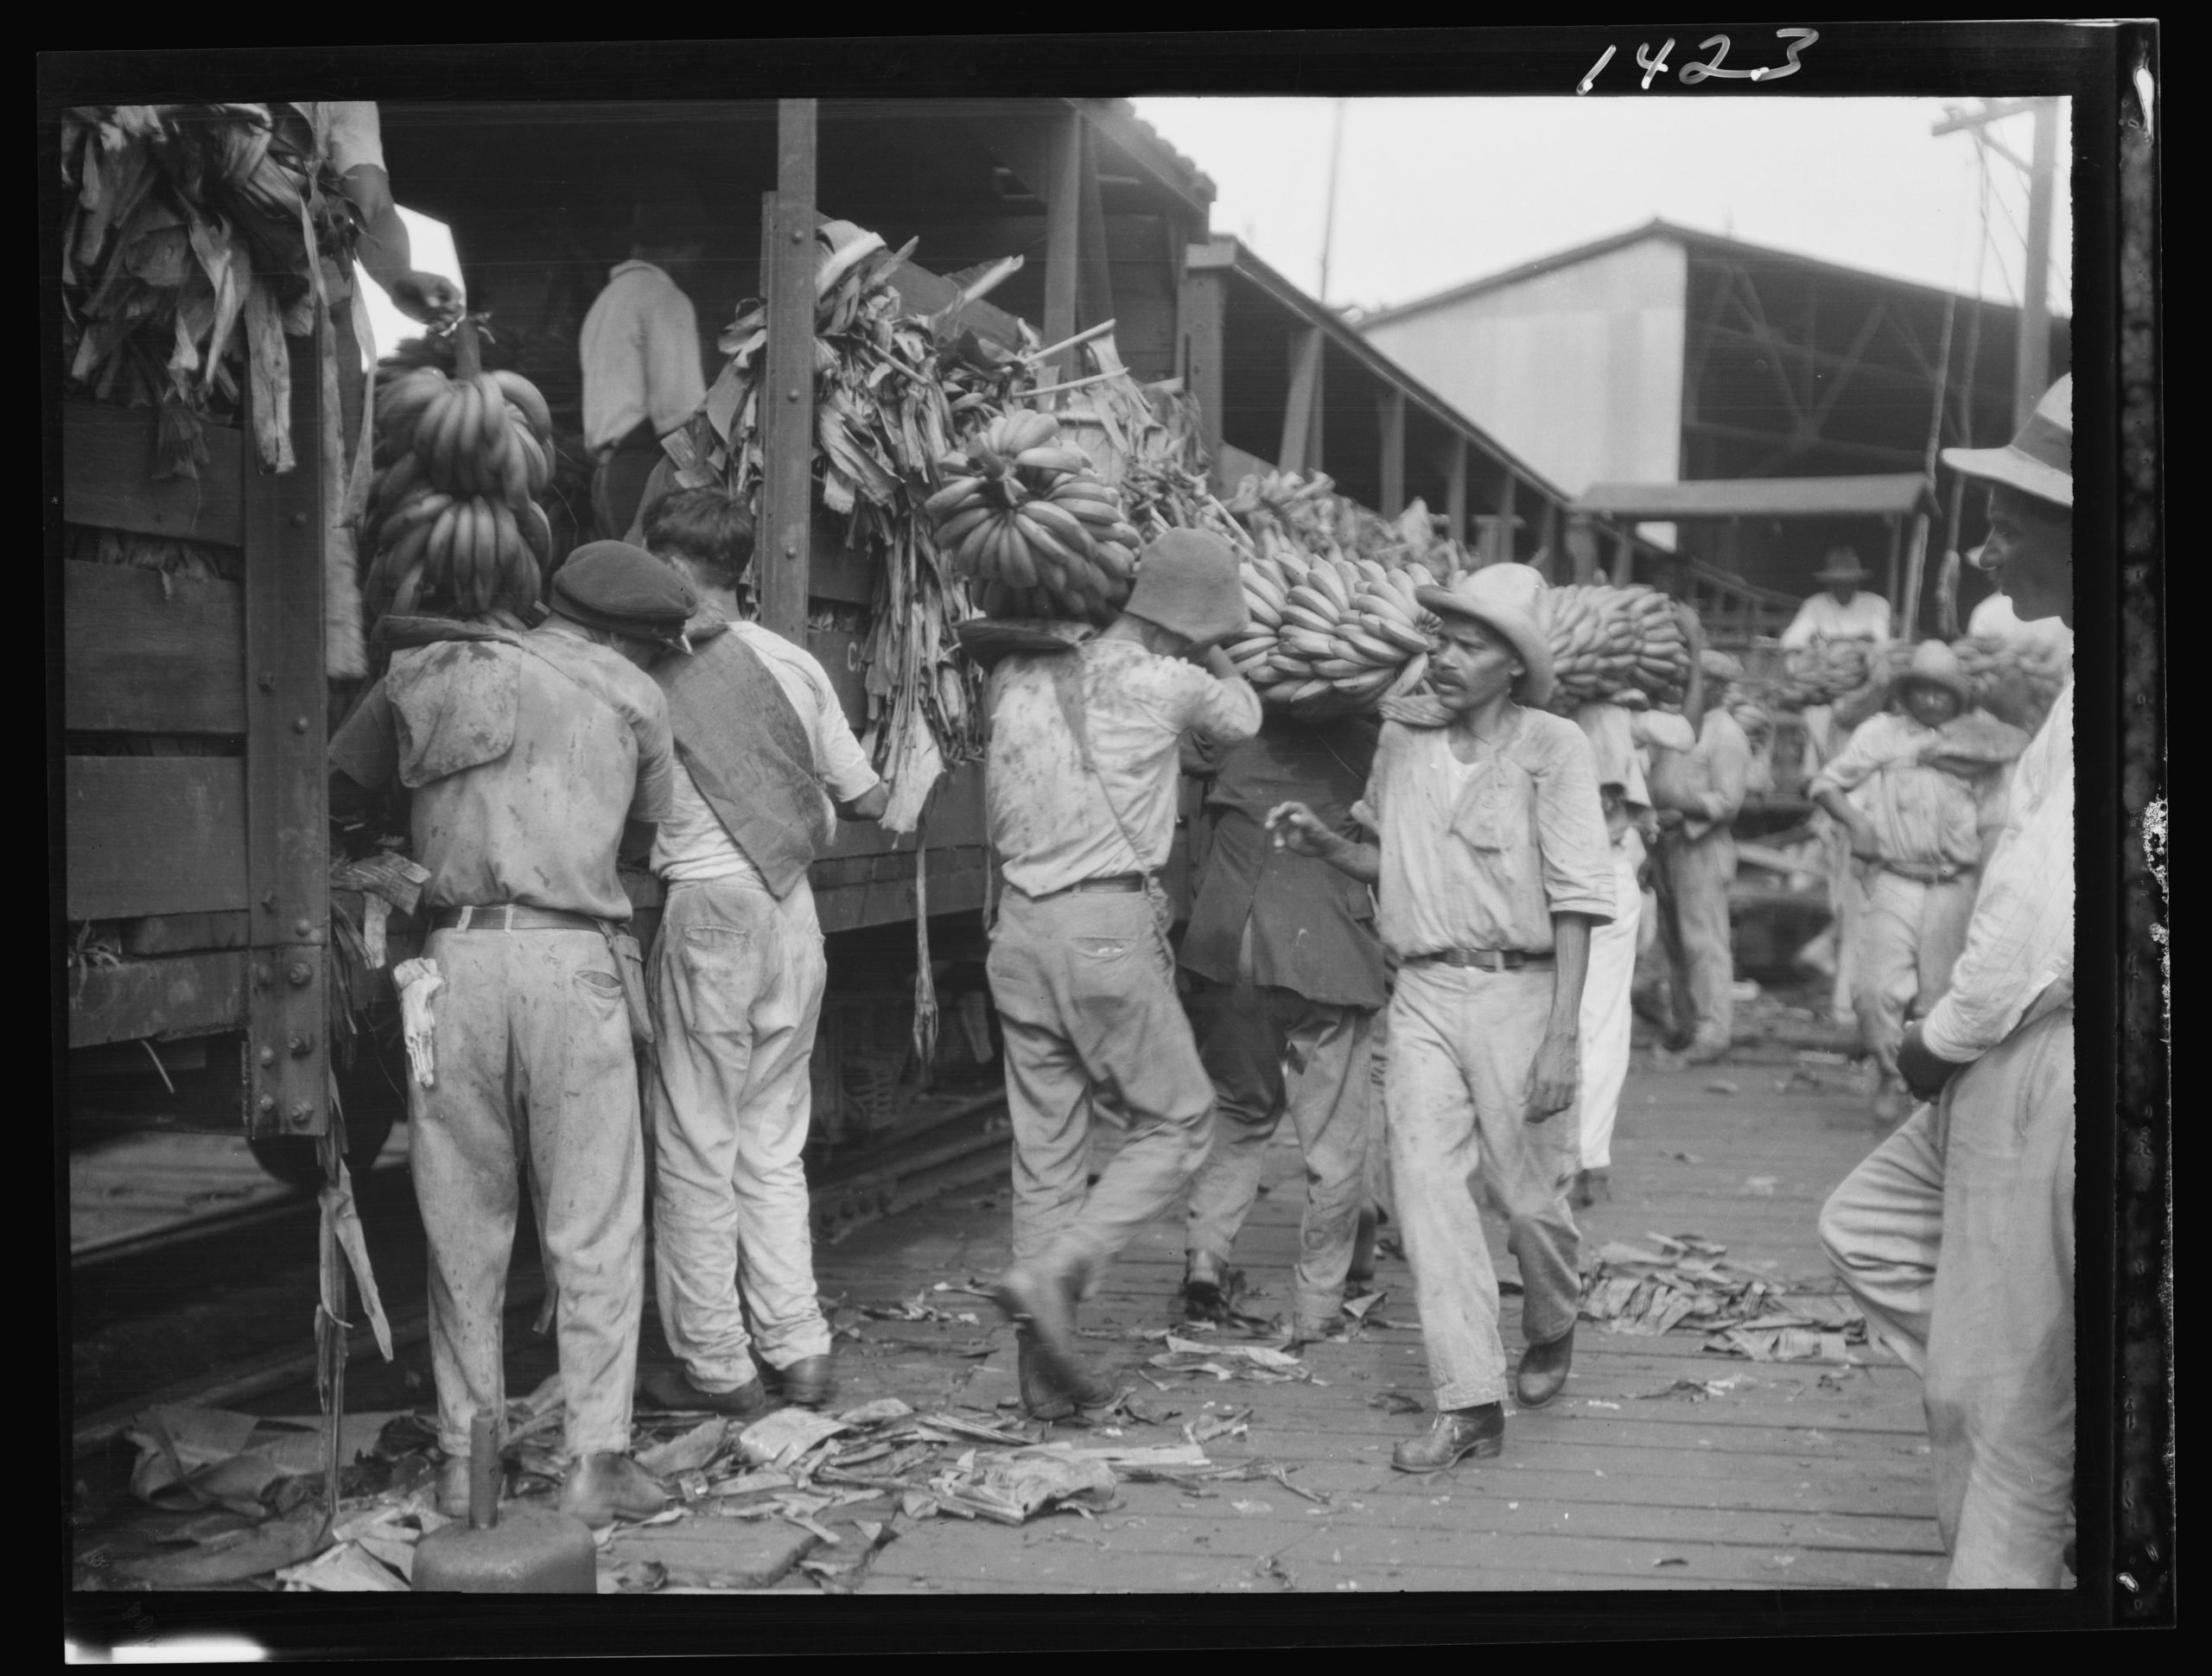 Workers unload bananas in New Orleans in the 1920s (United States Library of Congress, Wikipedia)